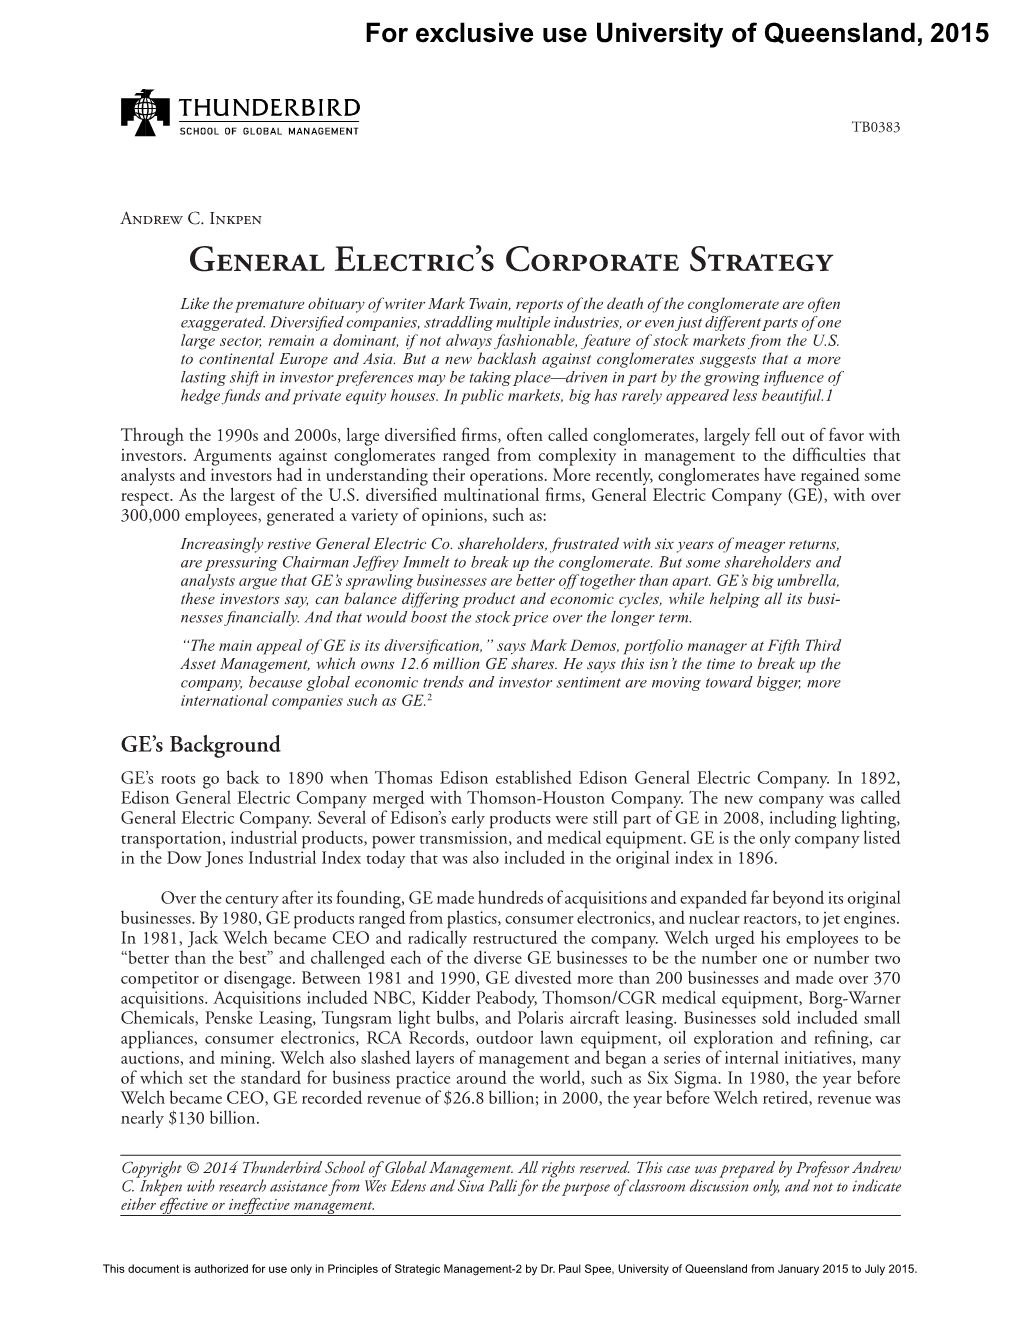 General Electric's Corporate Strategy